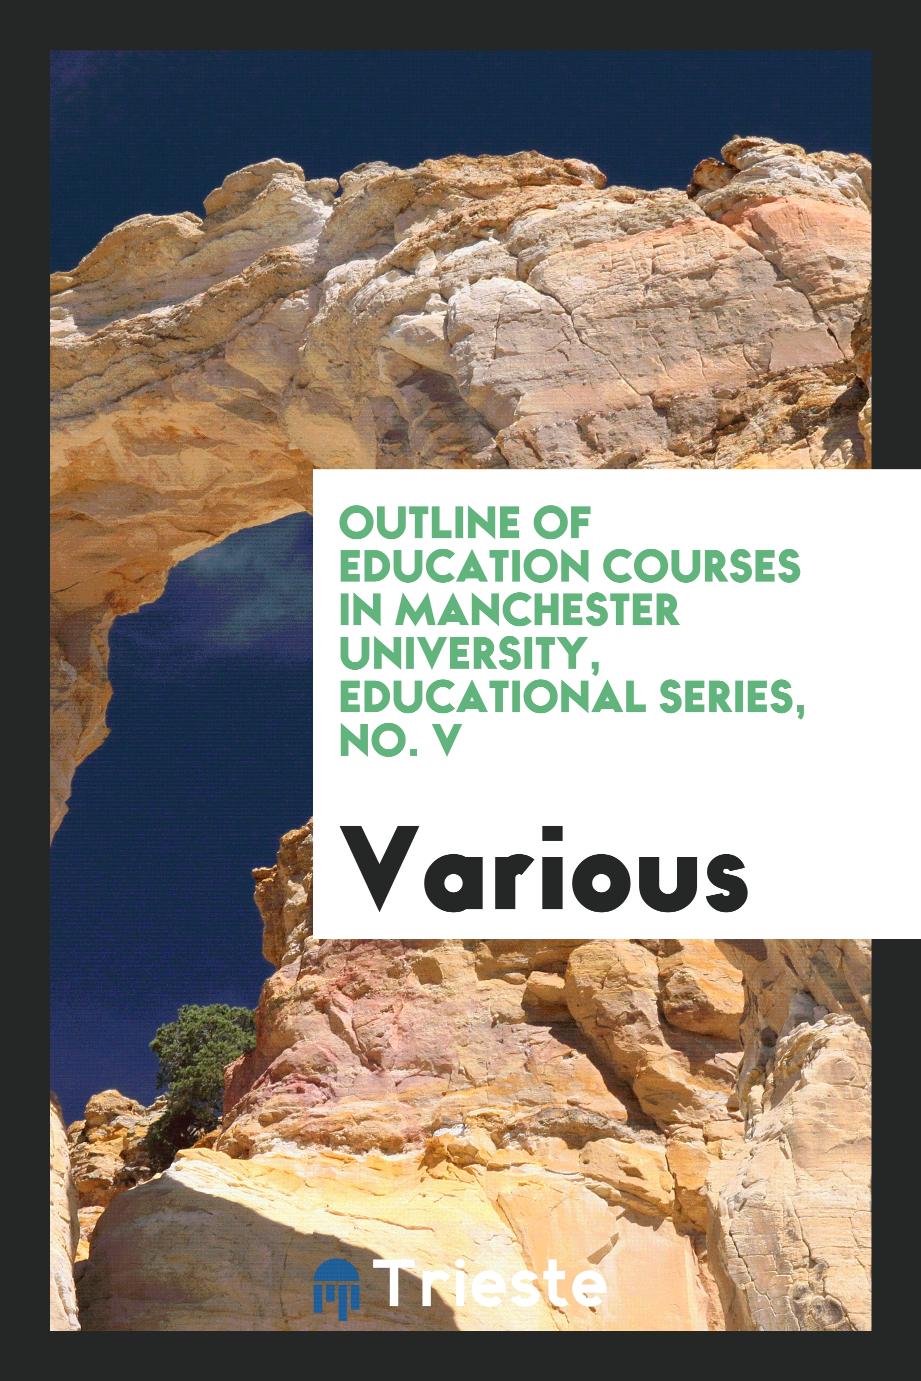 Outline of education courses in Manchester university, Educational series, No. V